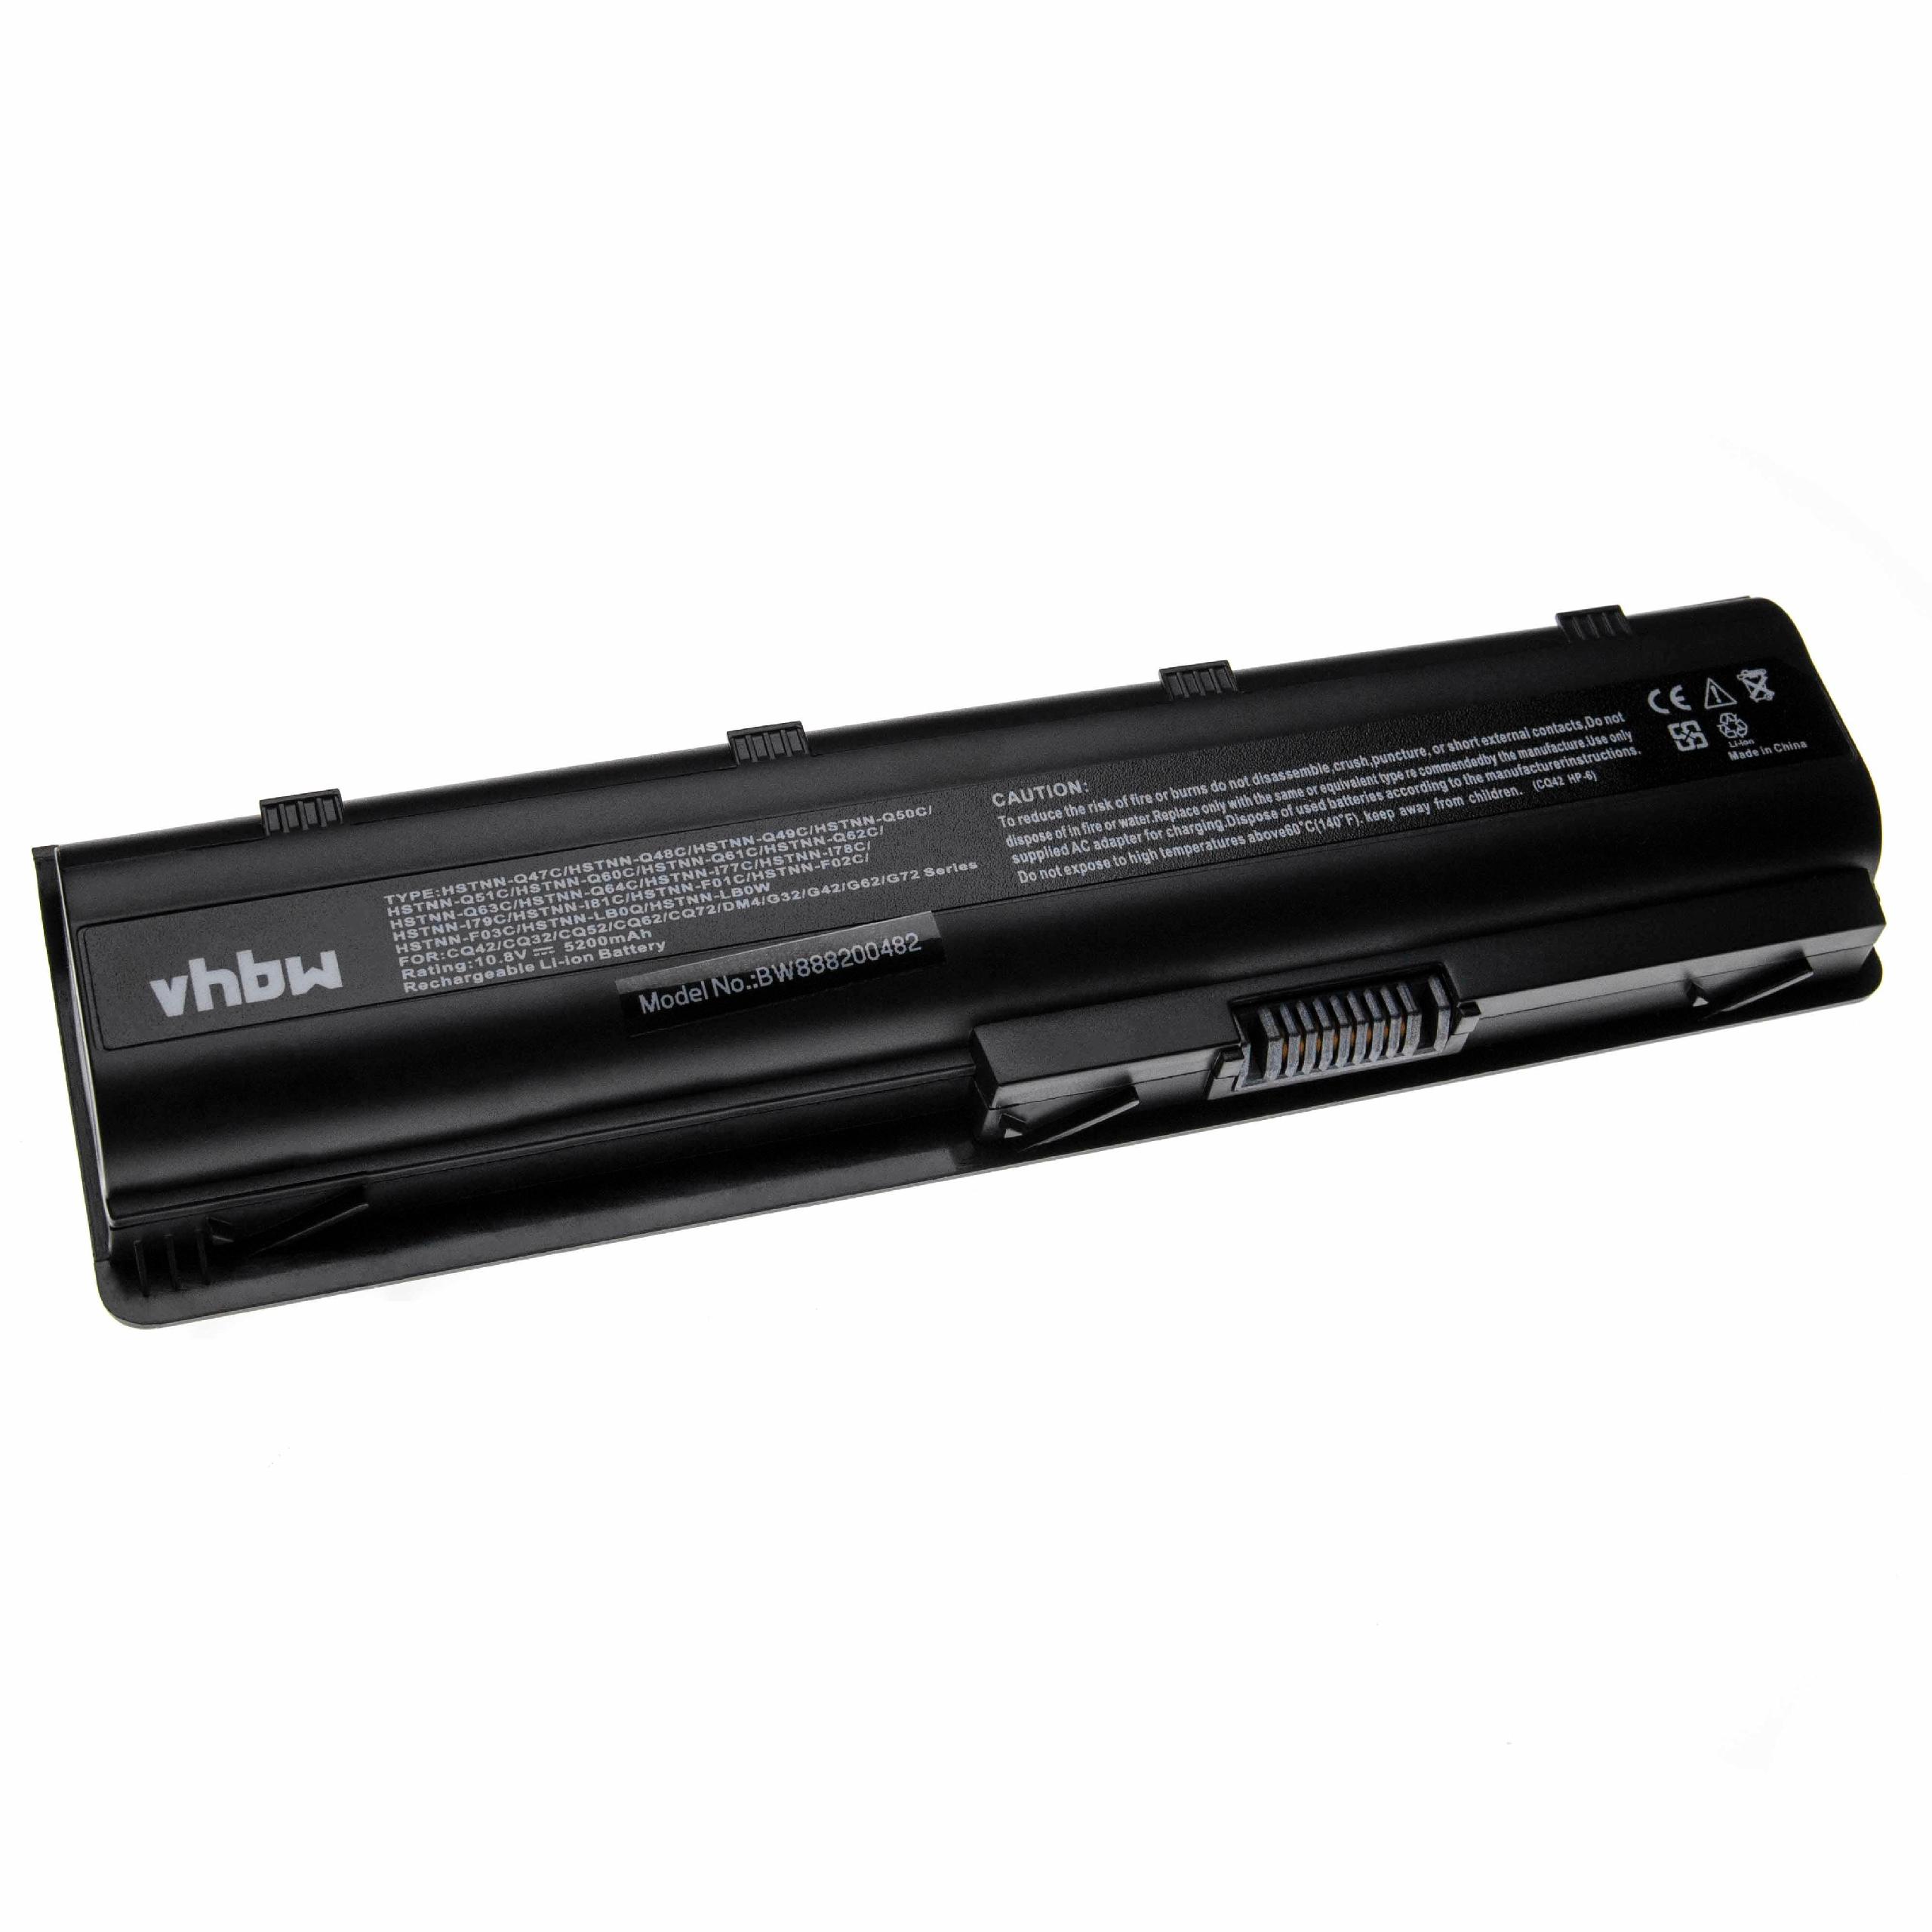 Notebook Battery Replacement for HP / Compaq 586007-541, 586006-361, 586006-321 - 5200mAh 10.8V Li-Ion, black